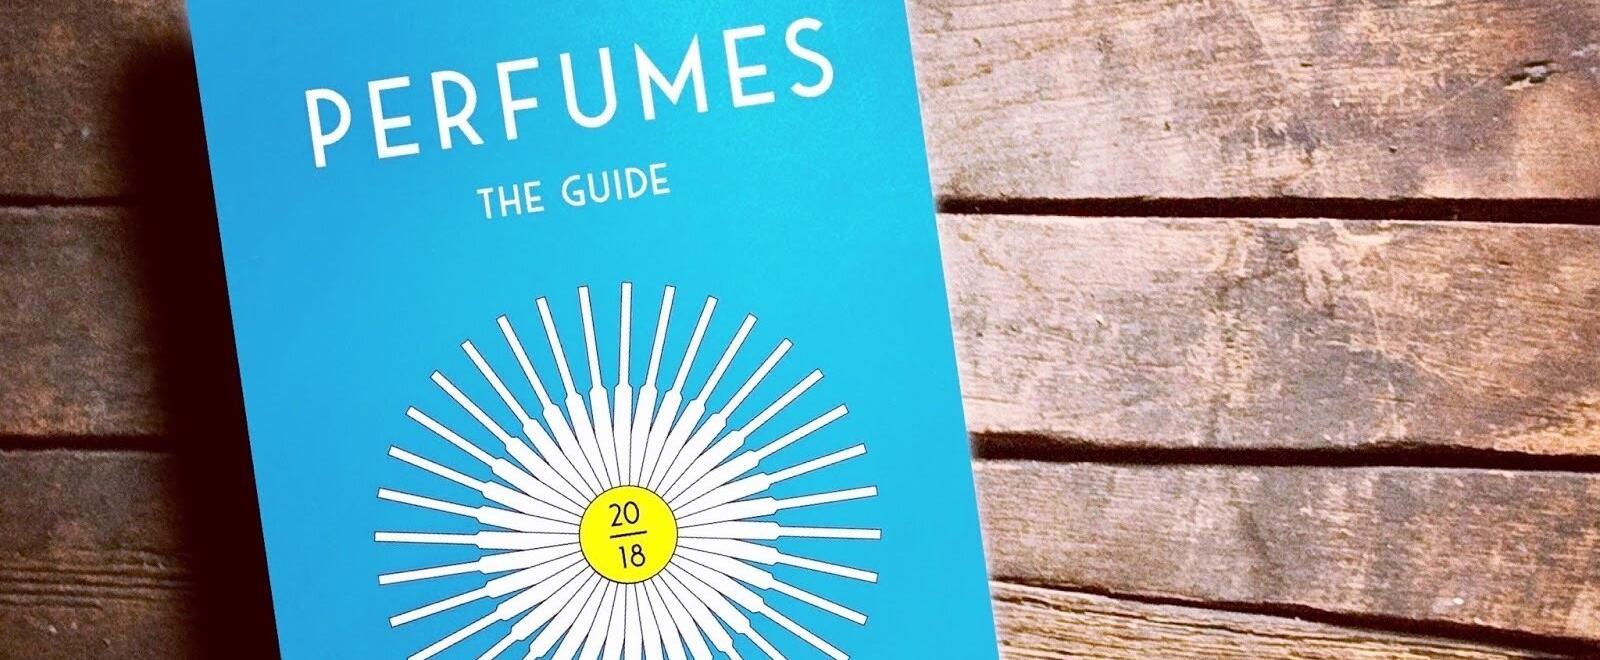 Perfumes: The Guide (2018) - Impressions of a Beginner